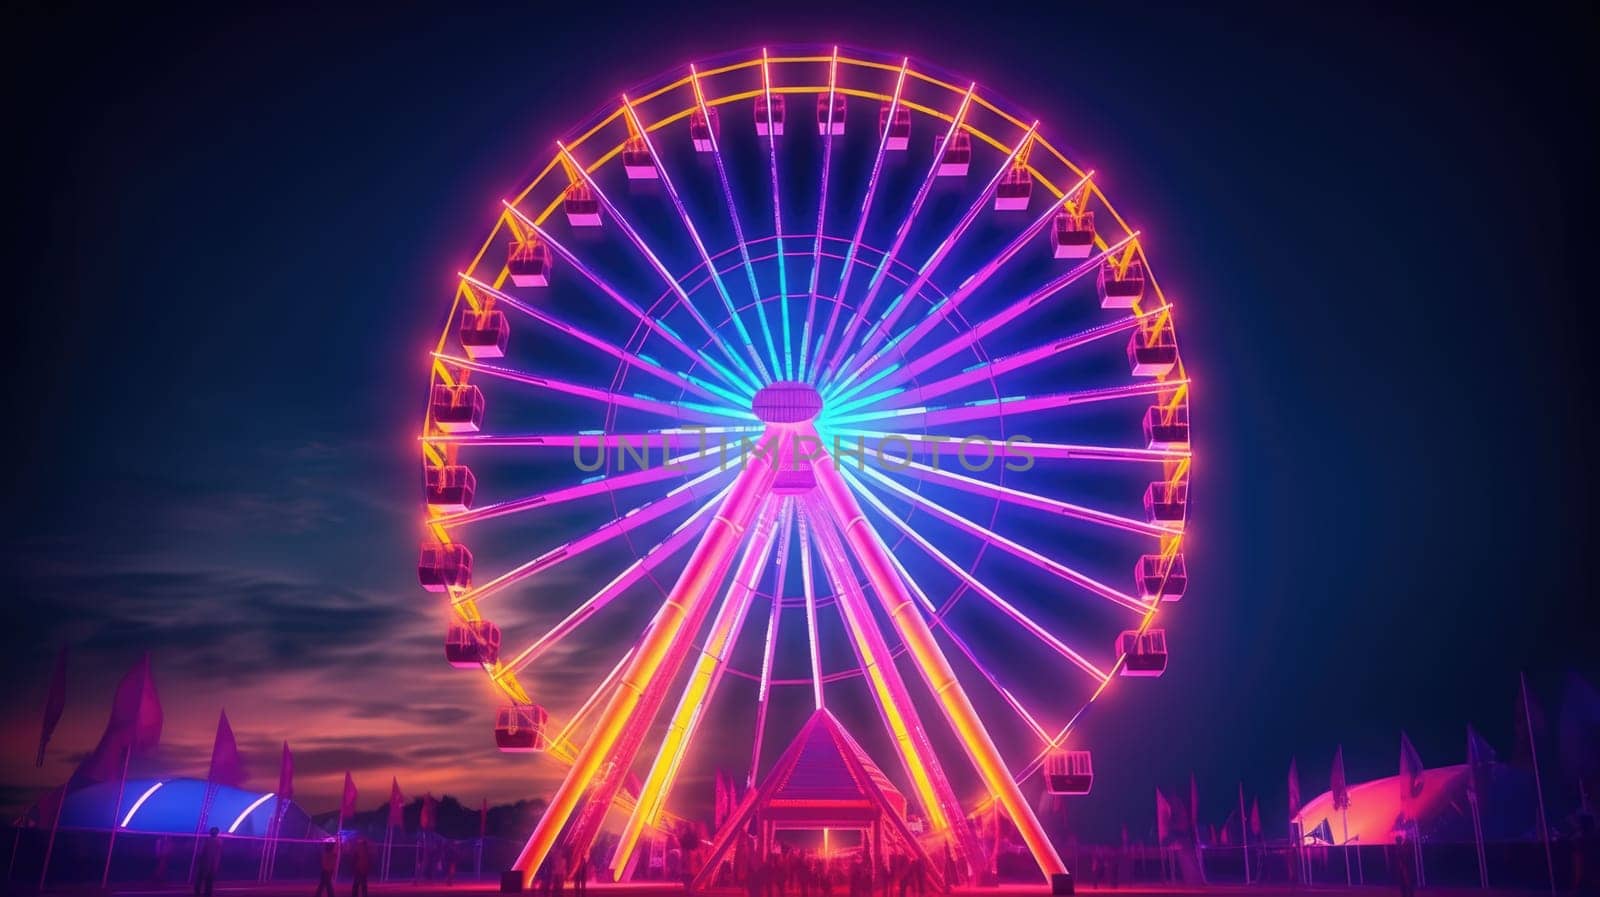 Colorful Ferris Wheel with Rainbow Lights in Dark Amusement Park at Night with bright colorful neon lights. by JuliaDorian